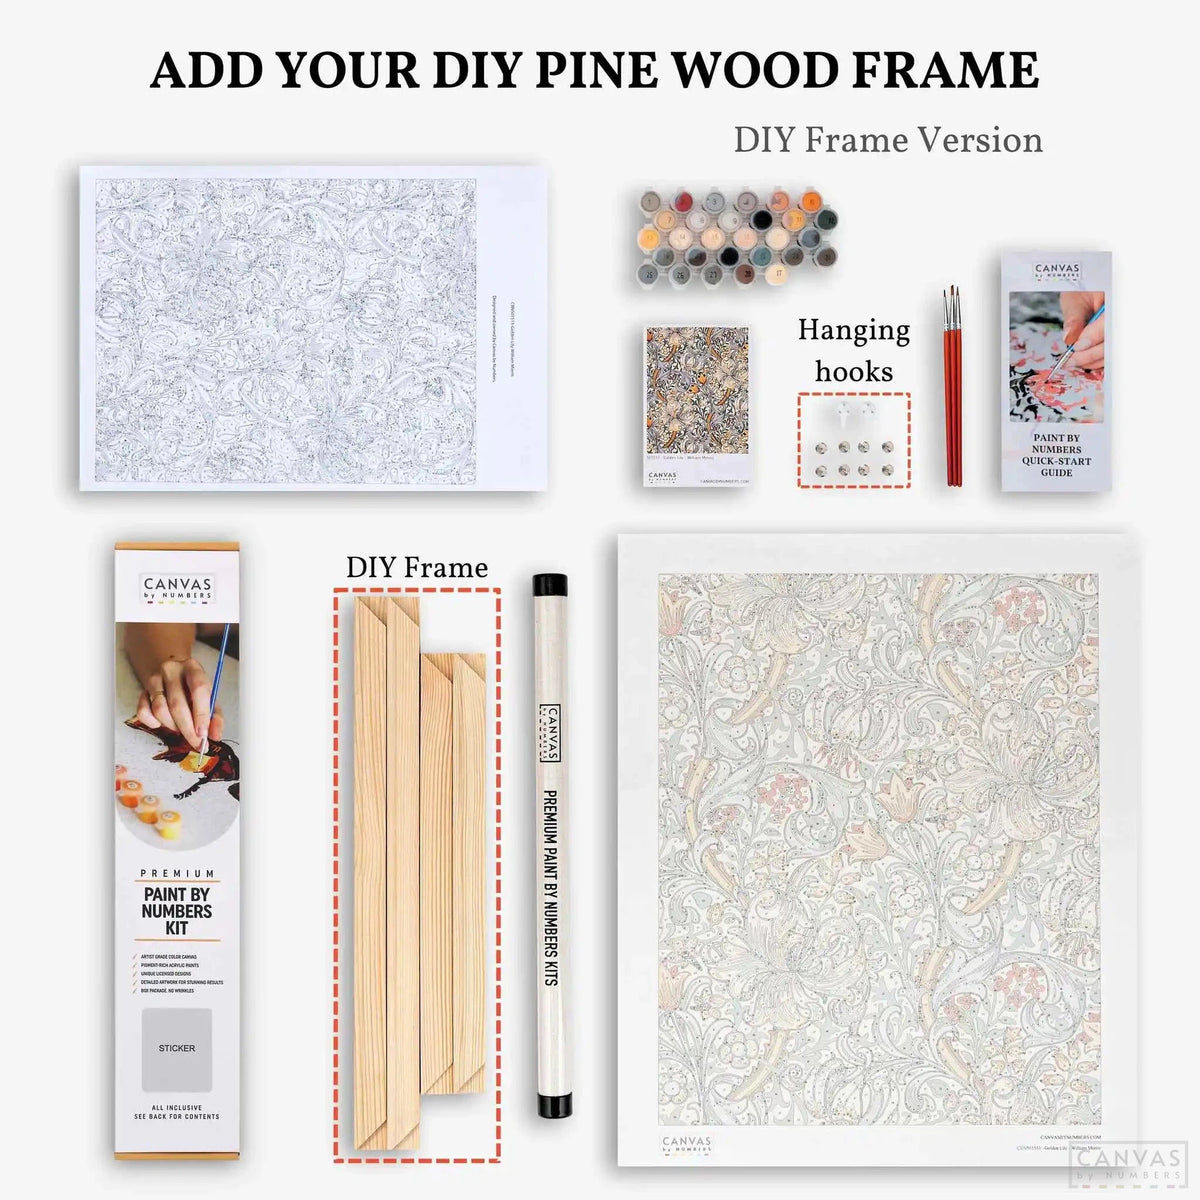 DIY_frame_version_paint_by_numbers